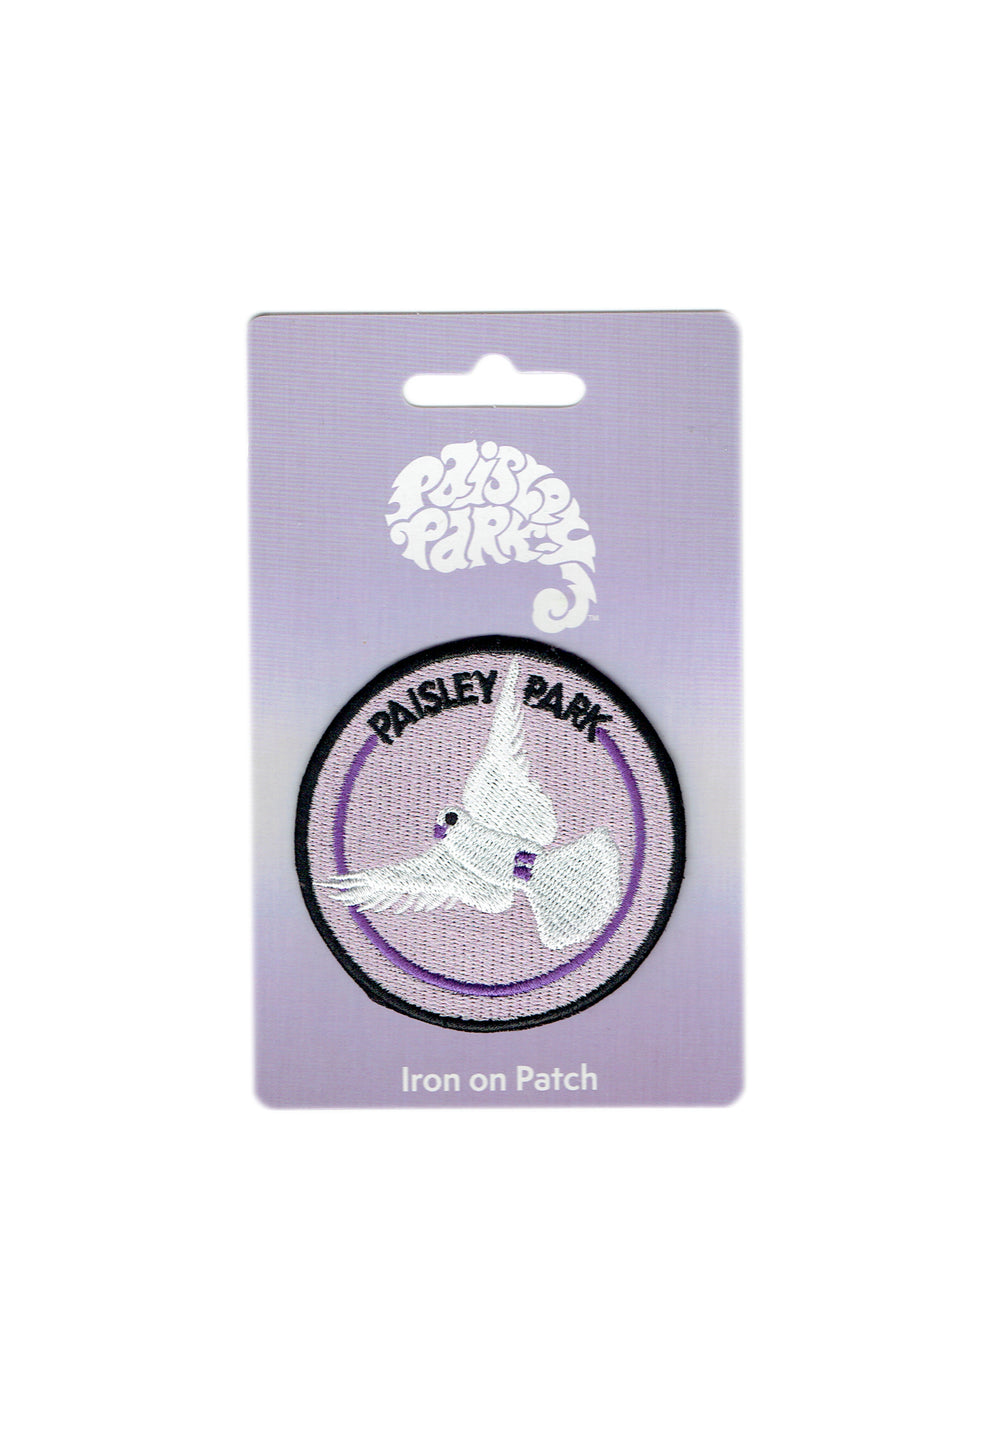 Prince – Paisley Park Official Iron On Patch Dove Round NEW